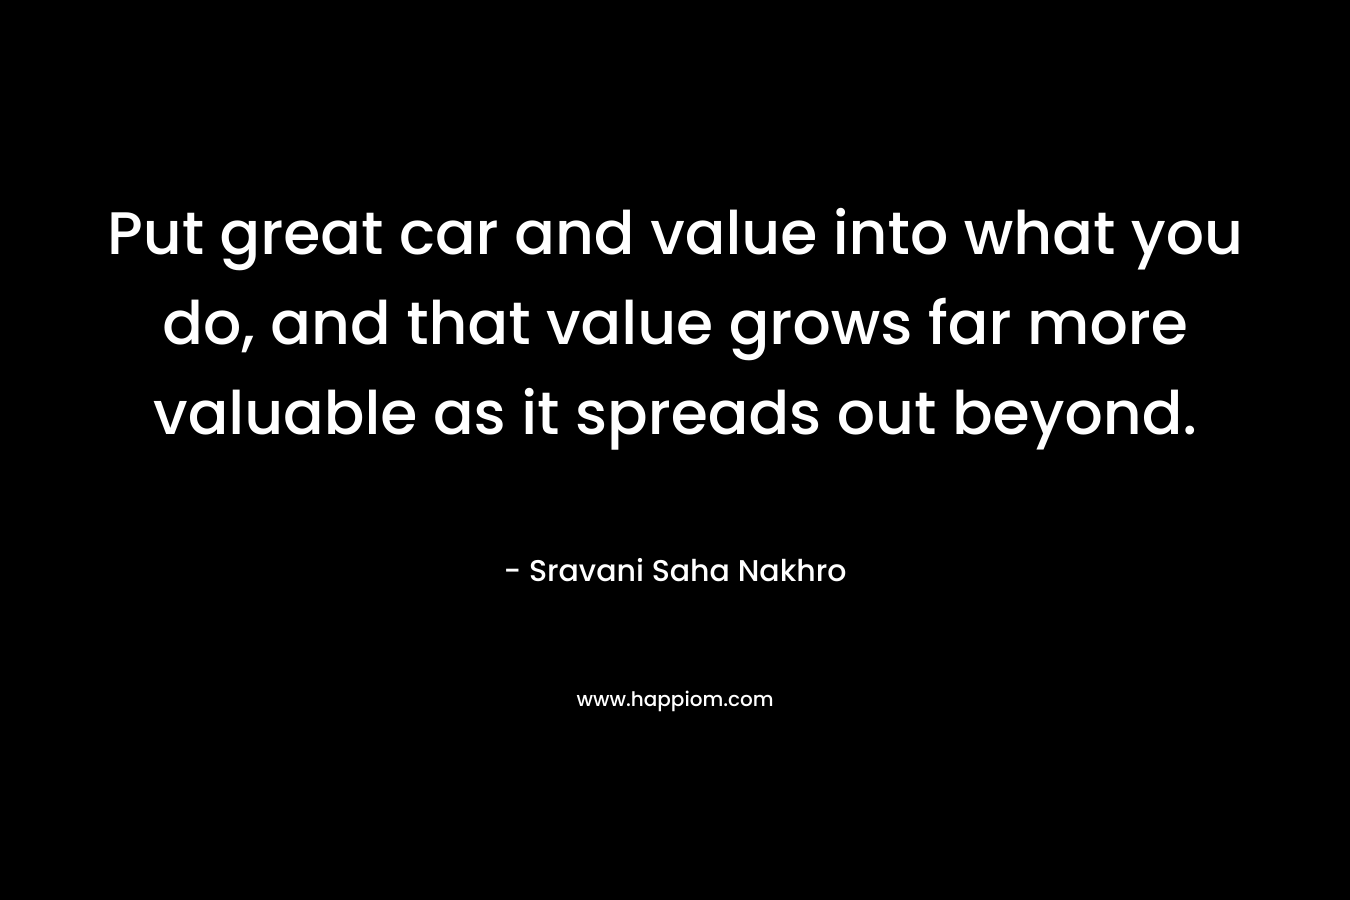 Put great car and value into what you do, and that value grows far more valuable as it spreads out beyond.